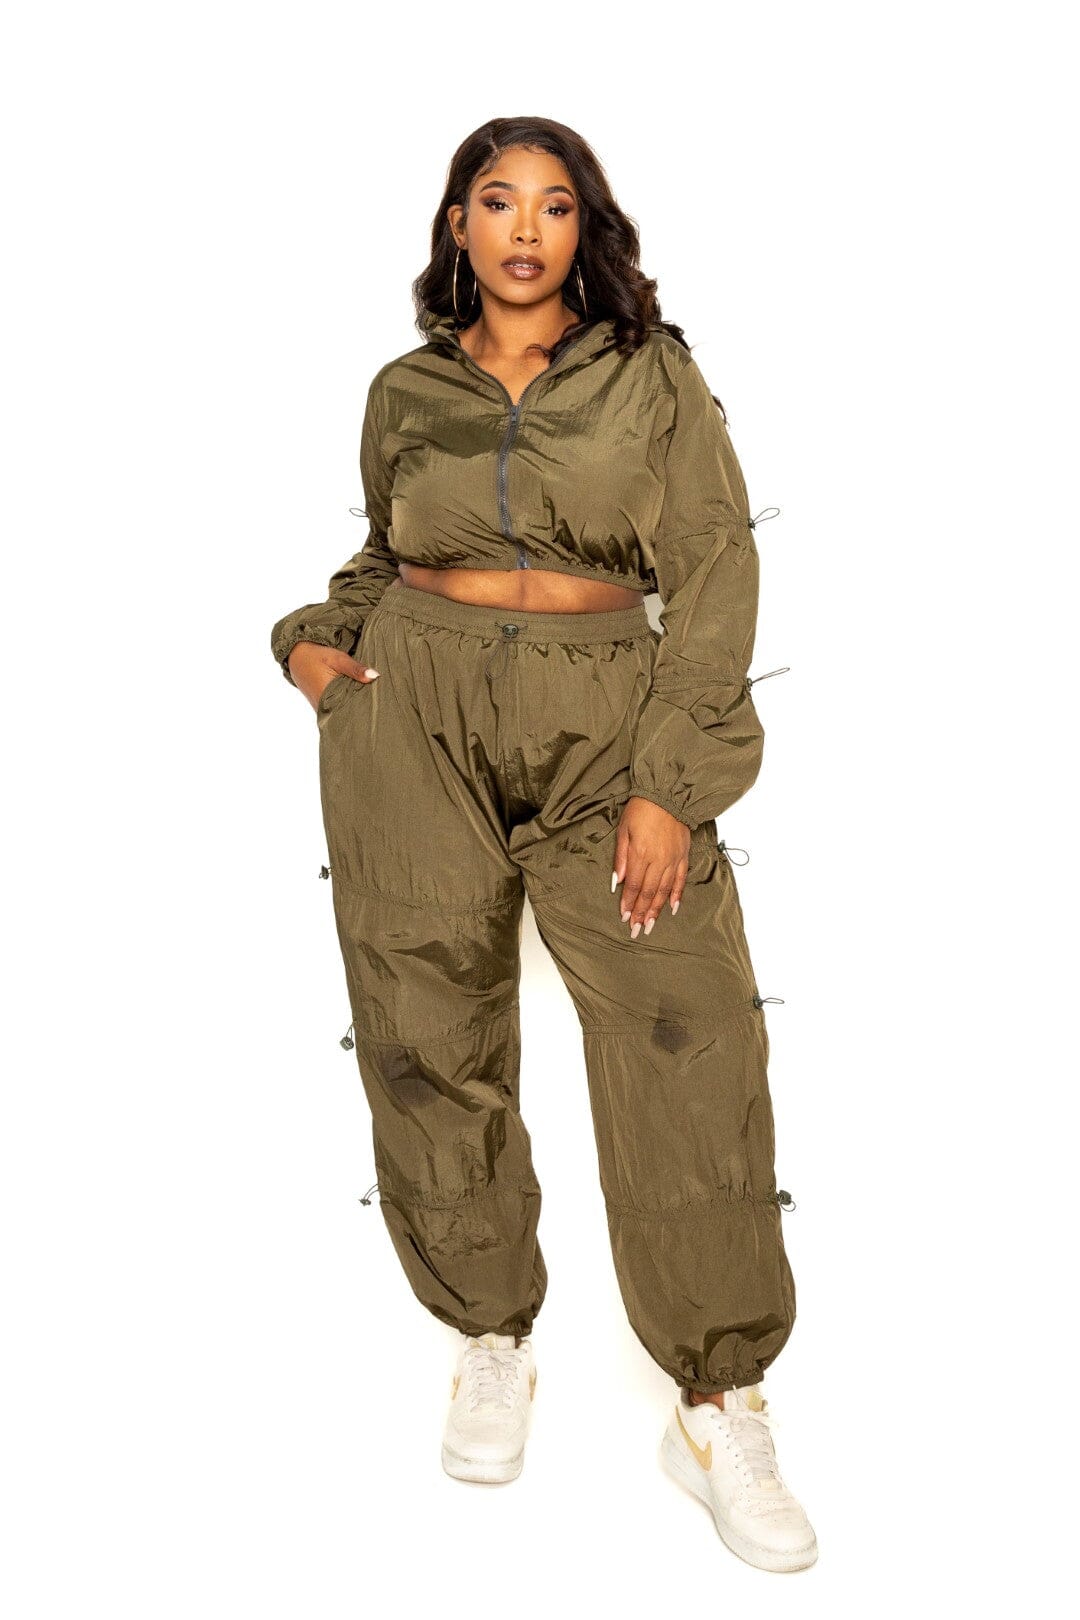 Buy Plus Size Romper - Two Piece Outfits Crop Top Shirt and Ruched Skinny  Pant Tracksuit Set Loungewear Jumpsuit White at